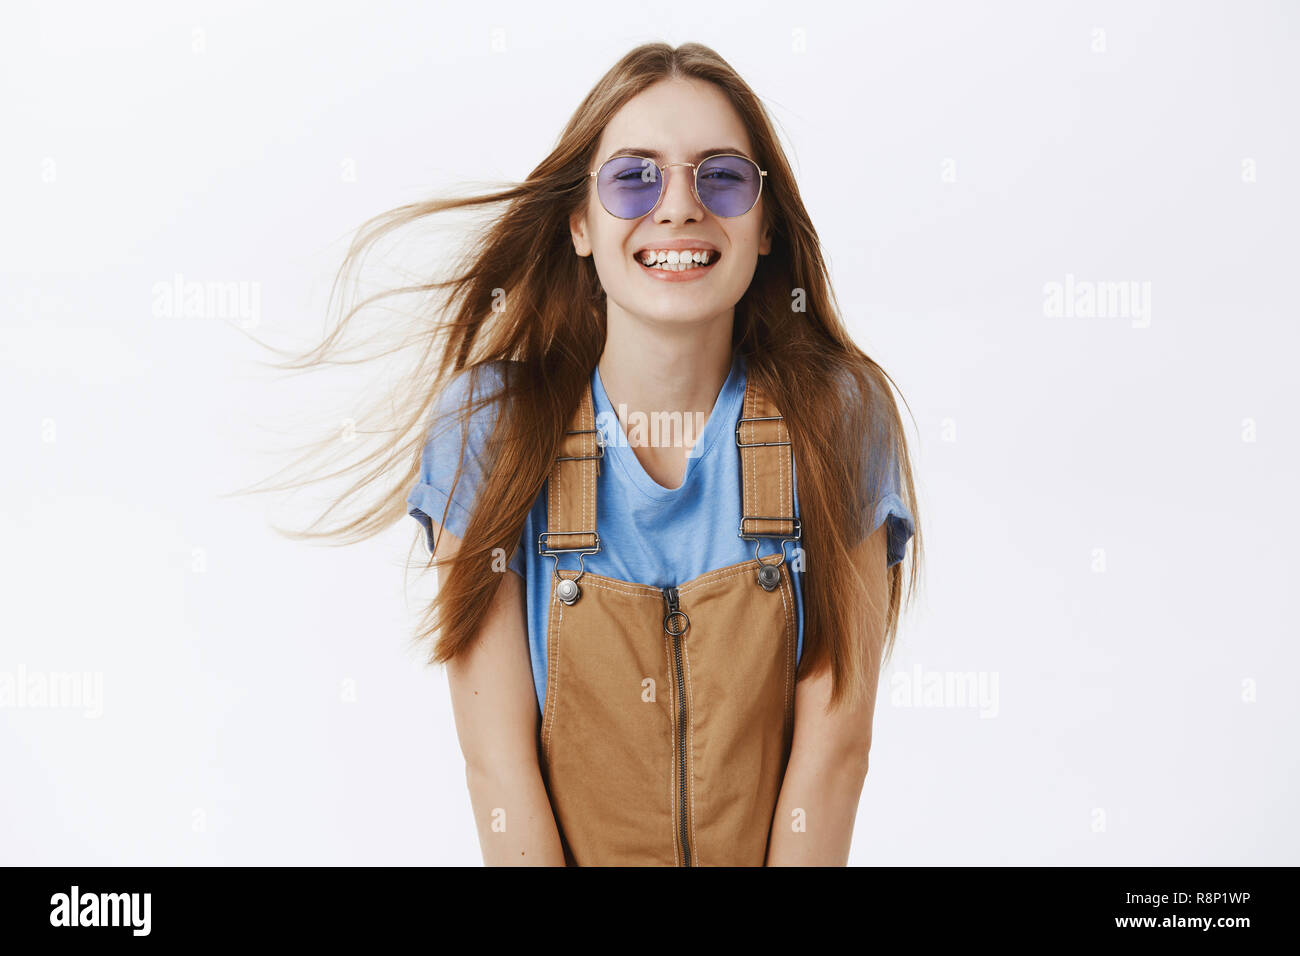 Waist-up shot of charming carefree caucasian girlfriend with long brown hair flicking on air smiling and laughing friendly and playfully posing against gray background in brown overalls and sunglasses Stock Photo